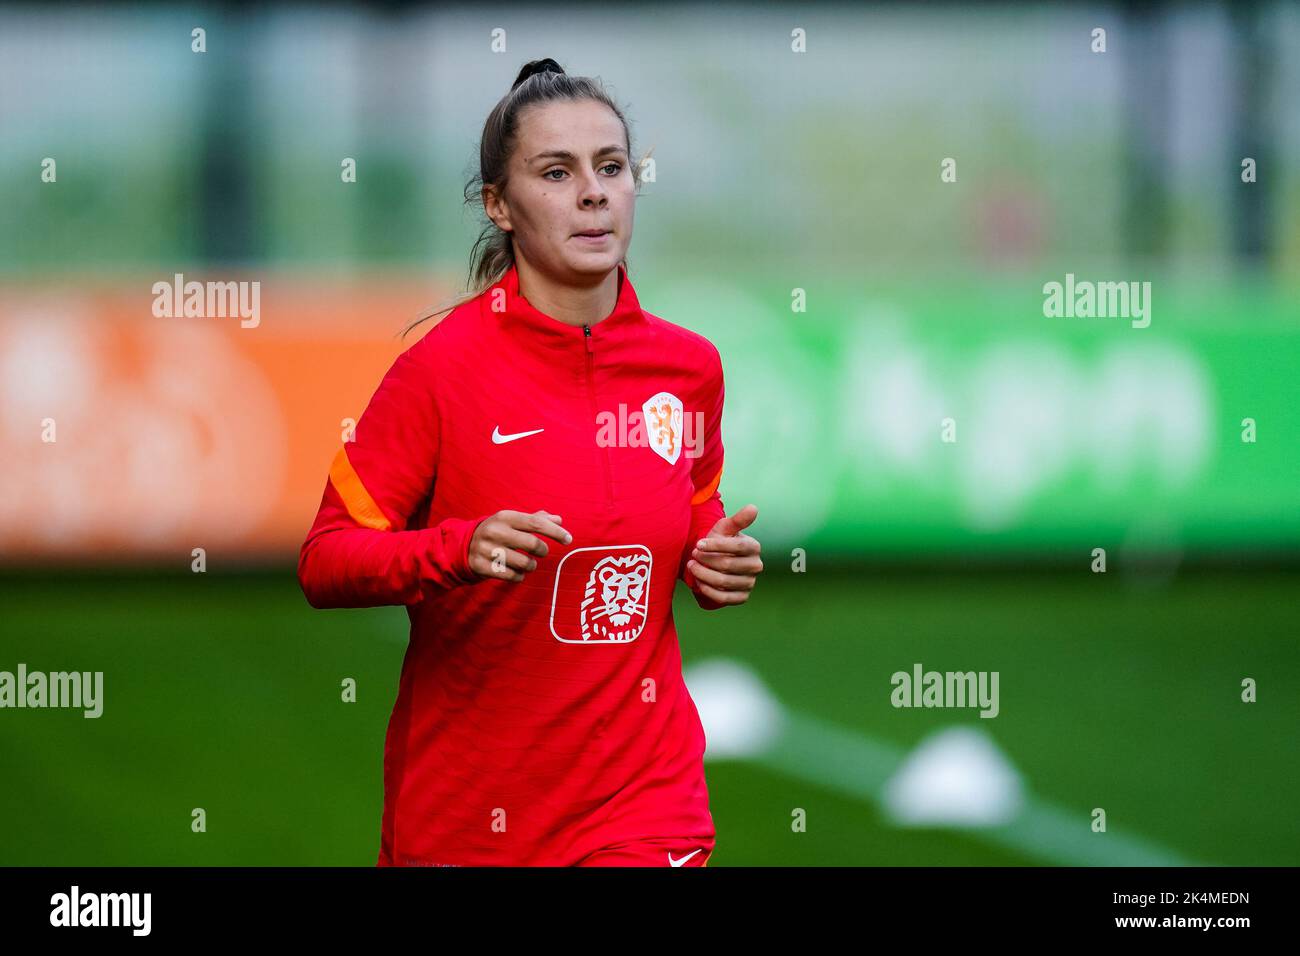 ZEIST, NETHERLANDS - OCTOBER 3: Victoria Pelova of the Netherlands during a Training Session of the Netherlands Women’s Football Team at the KNVB Campus on October 3, 2022 in Zeist, Netherlands (Photo by Joris Verwijst/Orange Pictures) Stock Photo